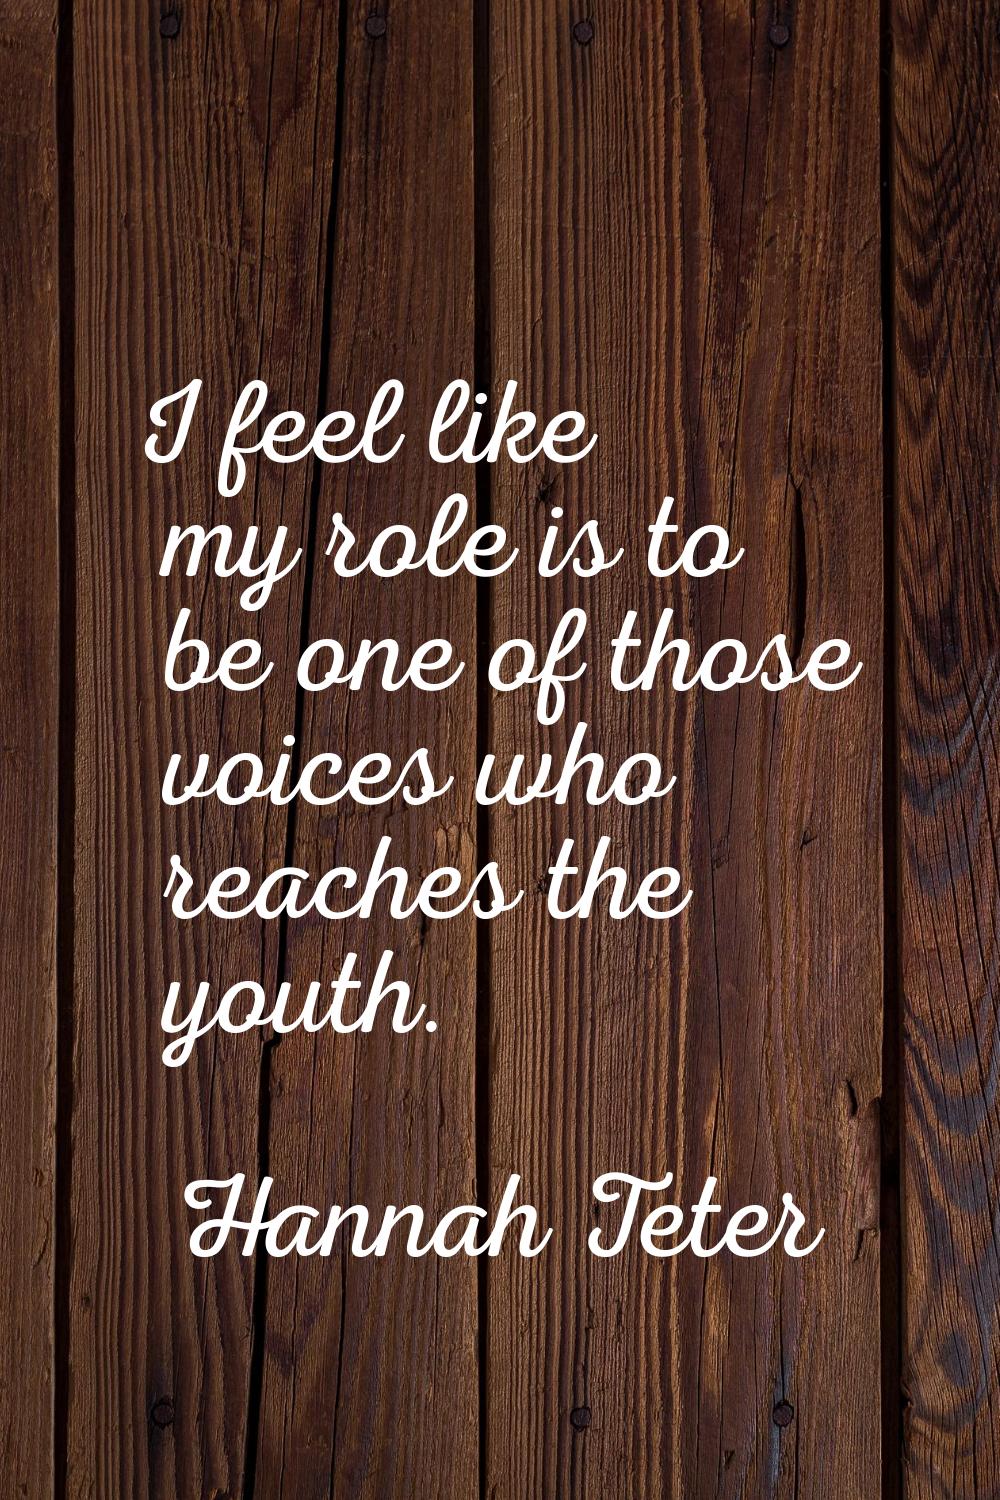 I feel like my role is to be one of those voices who reaches the youth.